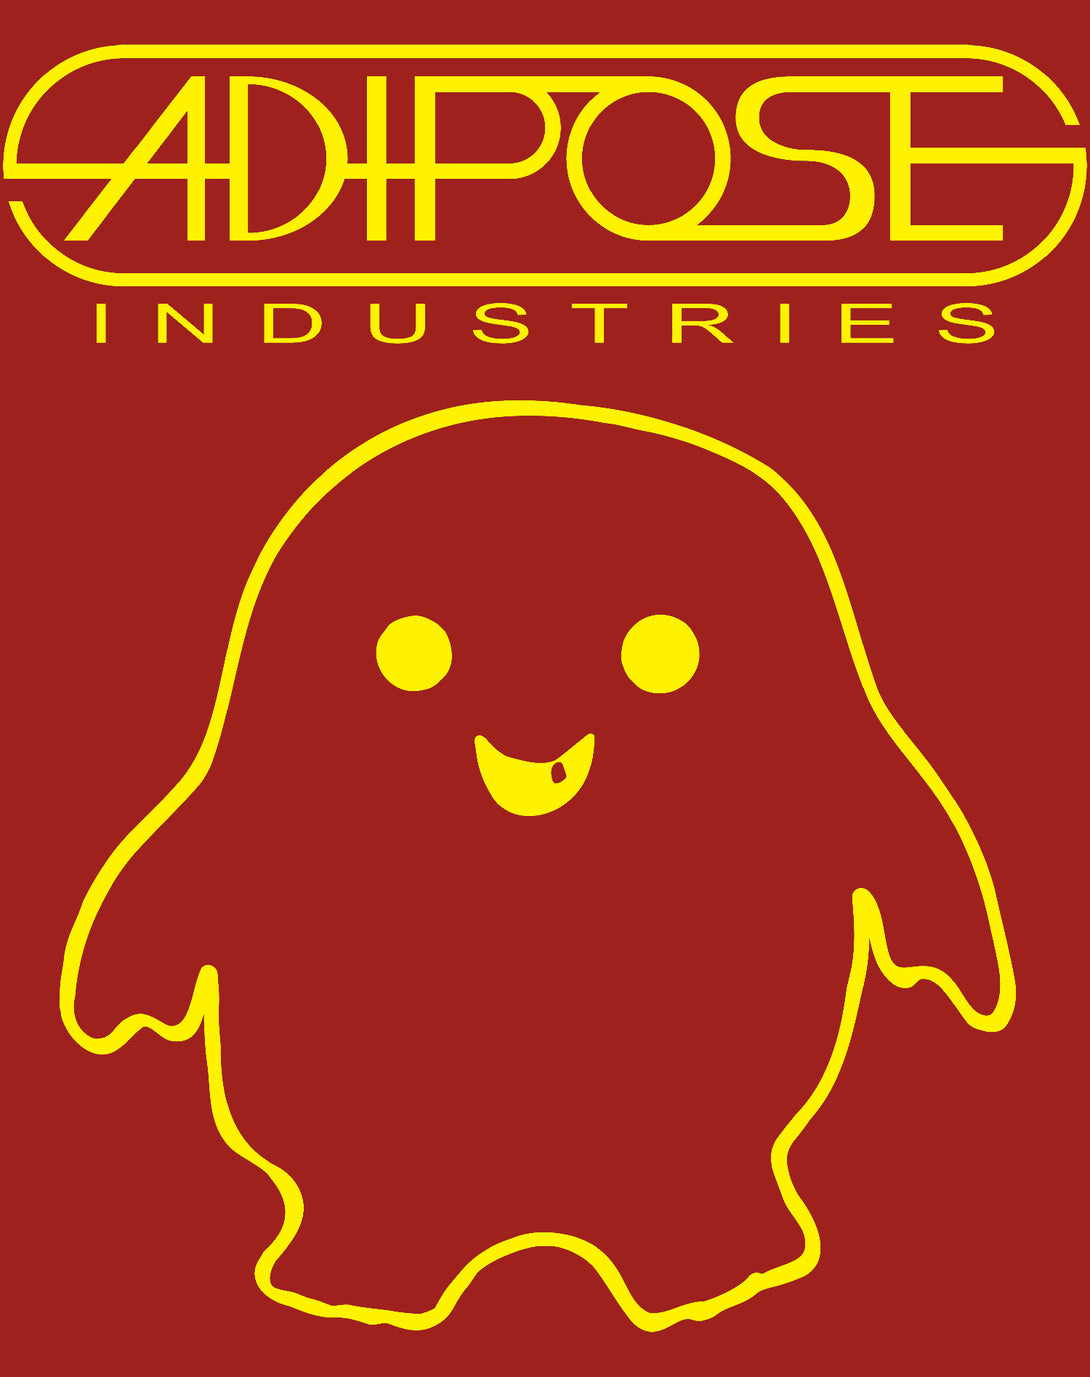 Doctor Who Spacetime-Tour Adipose Official Men's T-shirt Red - Urban Species Design Close Up